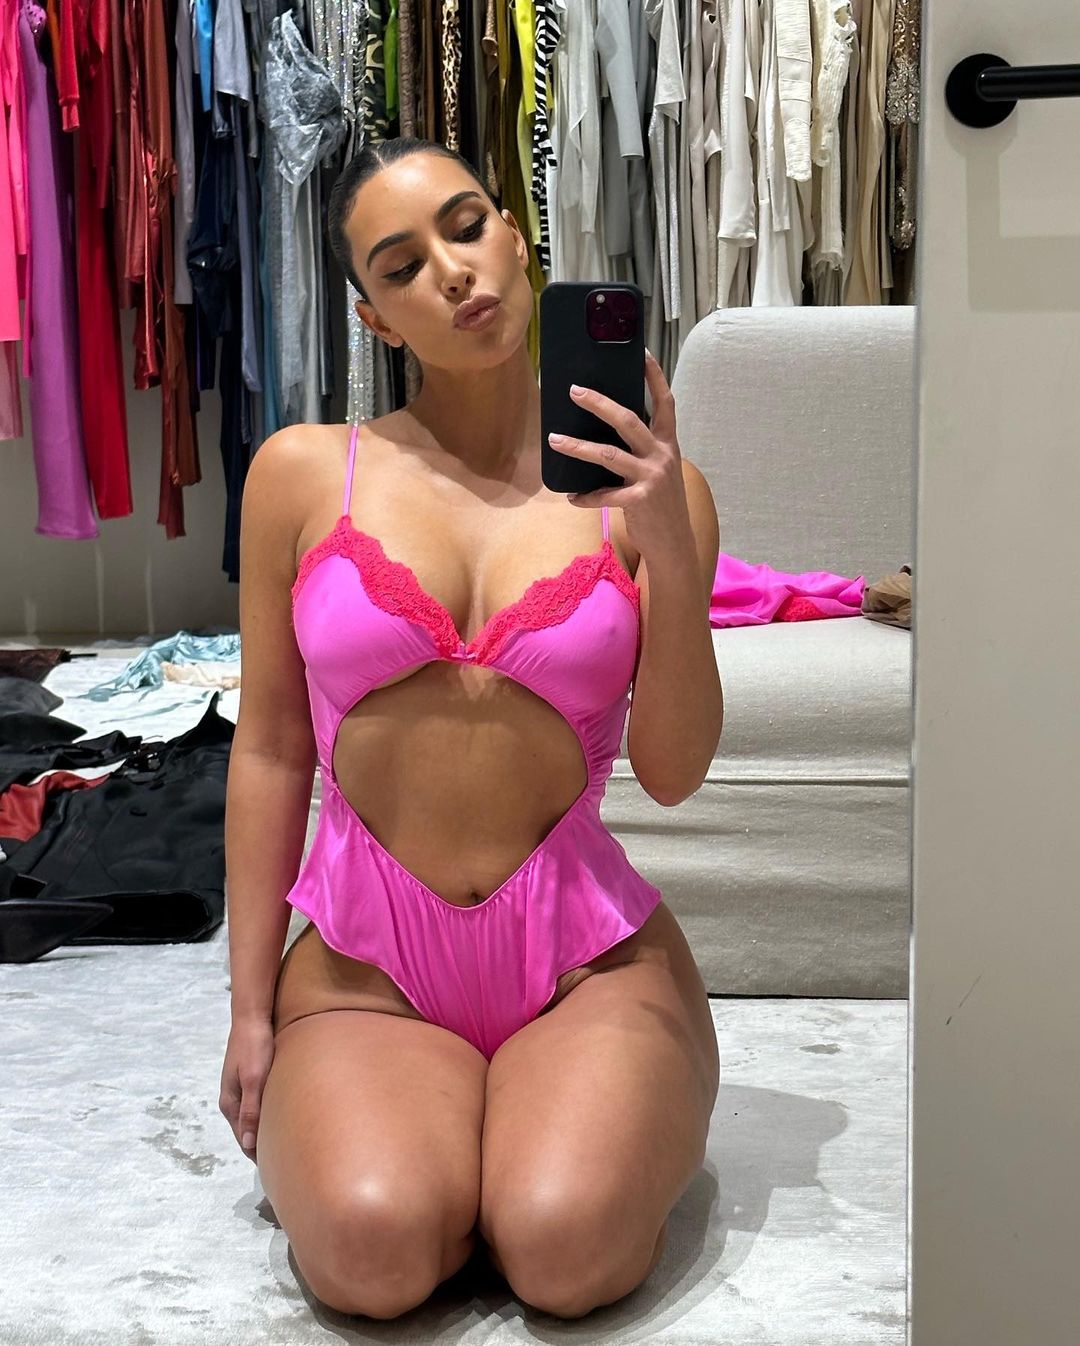 Kim Kardashian Models Her SKIMS Valentine's Day Collection In Sultry Selfies On Instagram